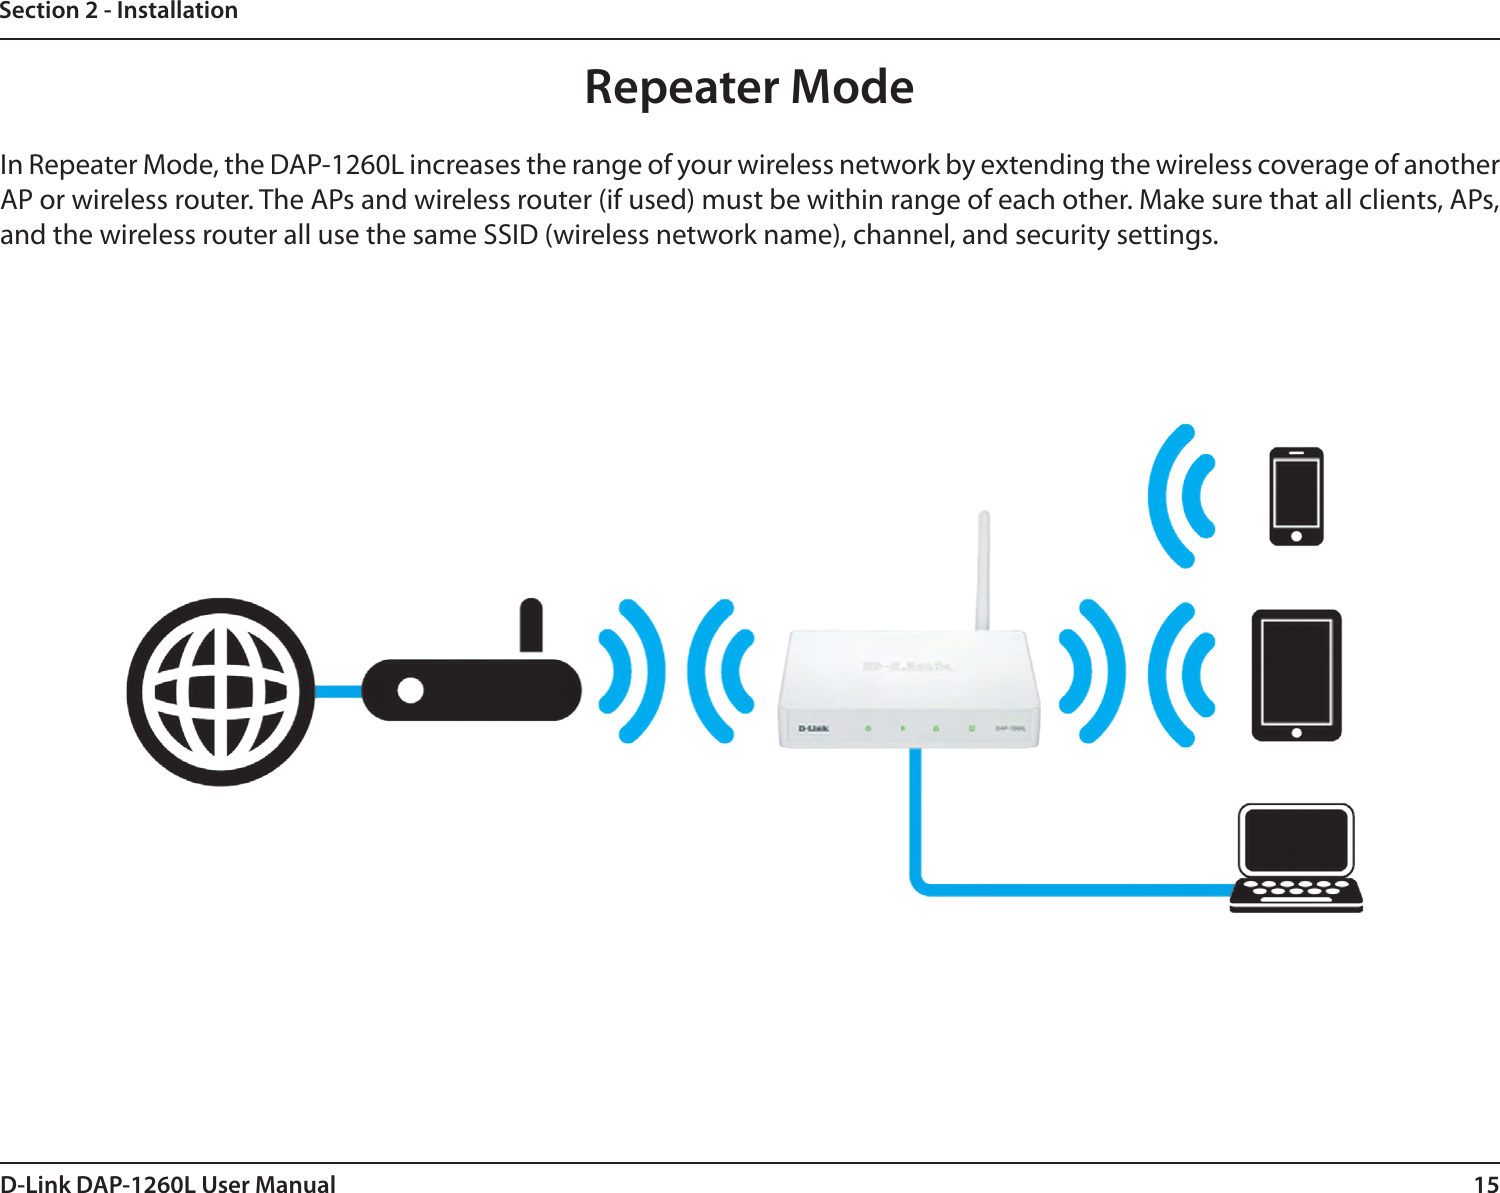 15D-Link DAP-1260L User ManualSection 2 - InstallationRepeater ModeIn Repeater Mode, the DAP-1260L increases the range of your wireless network by extending the wireless coverage of another AP or wireless router. The APs and wireless router (if used) must be within range of each other. Make sure that all clients, APs, and the wireless router all use the same SSID (wireless network name), channel, and security settings.